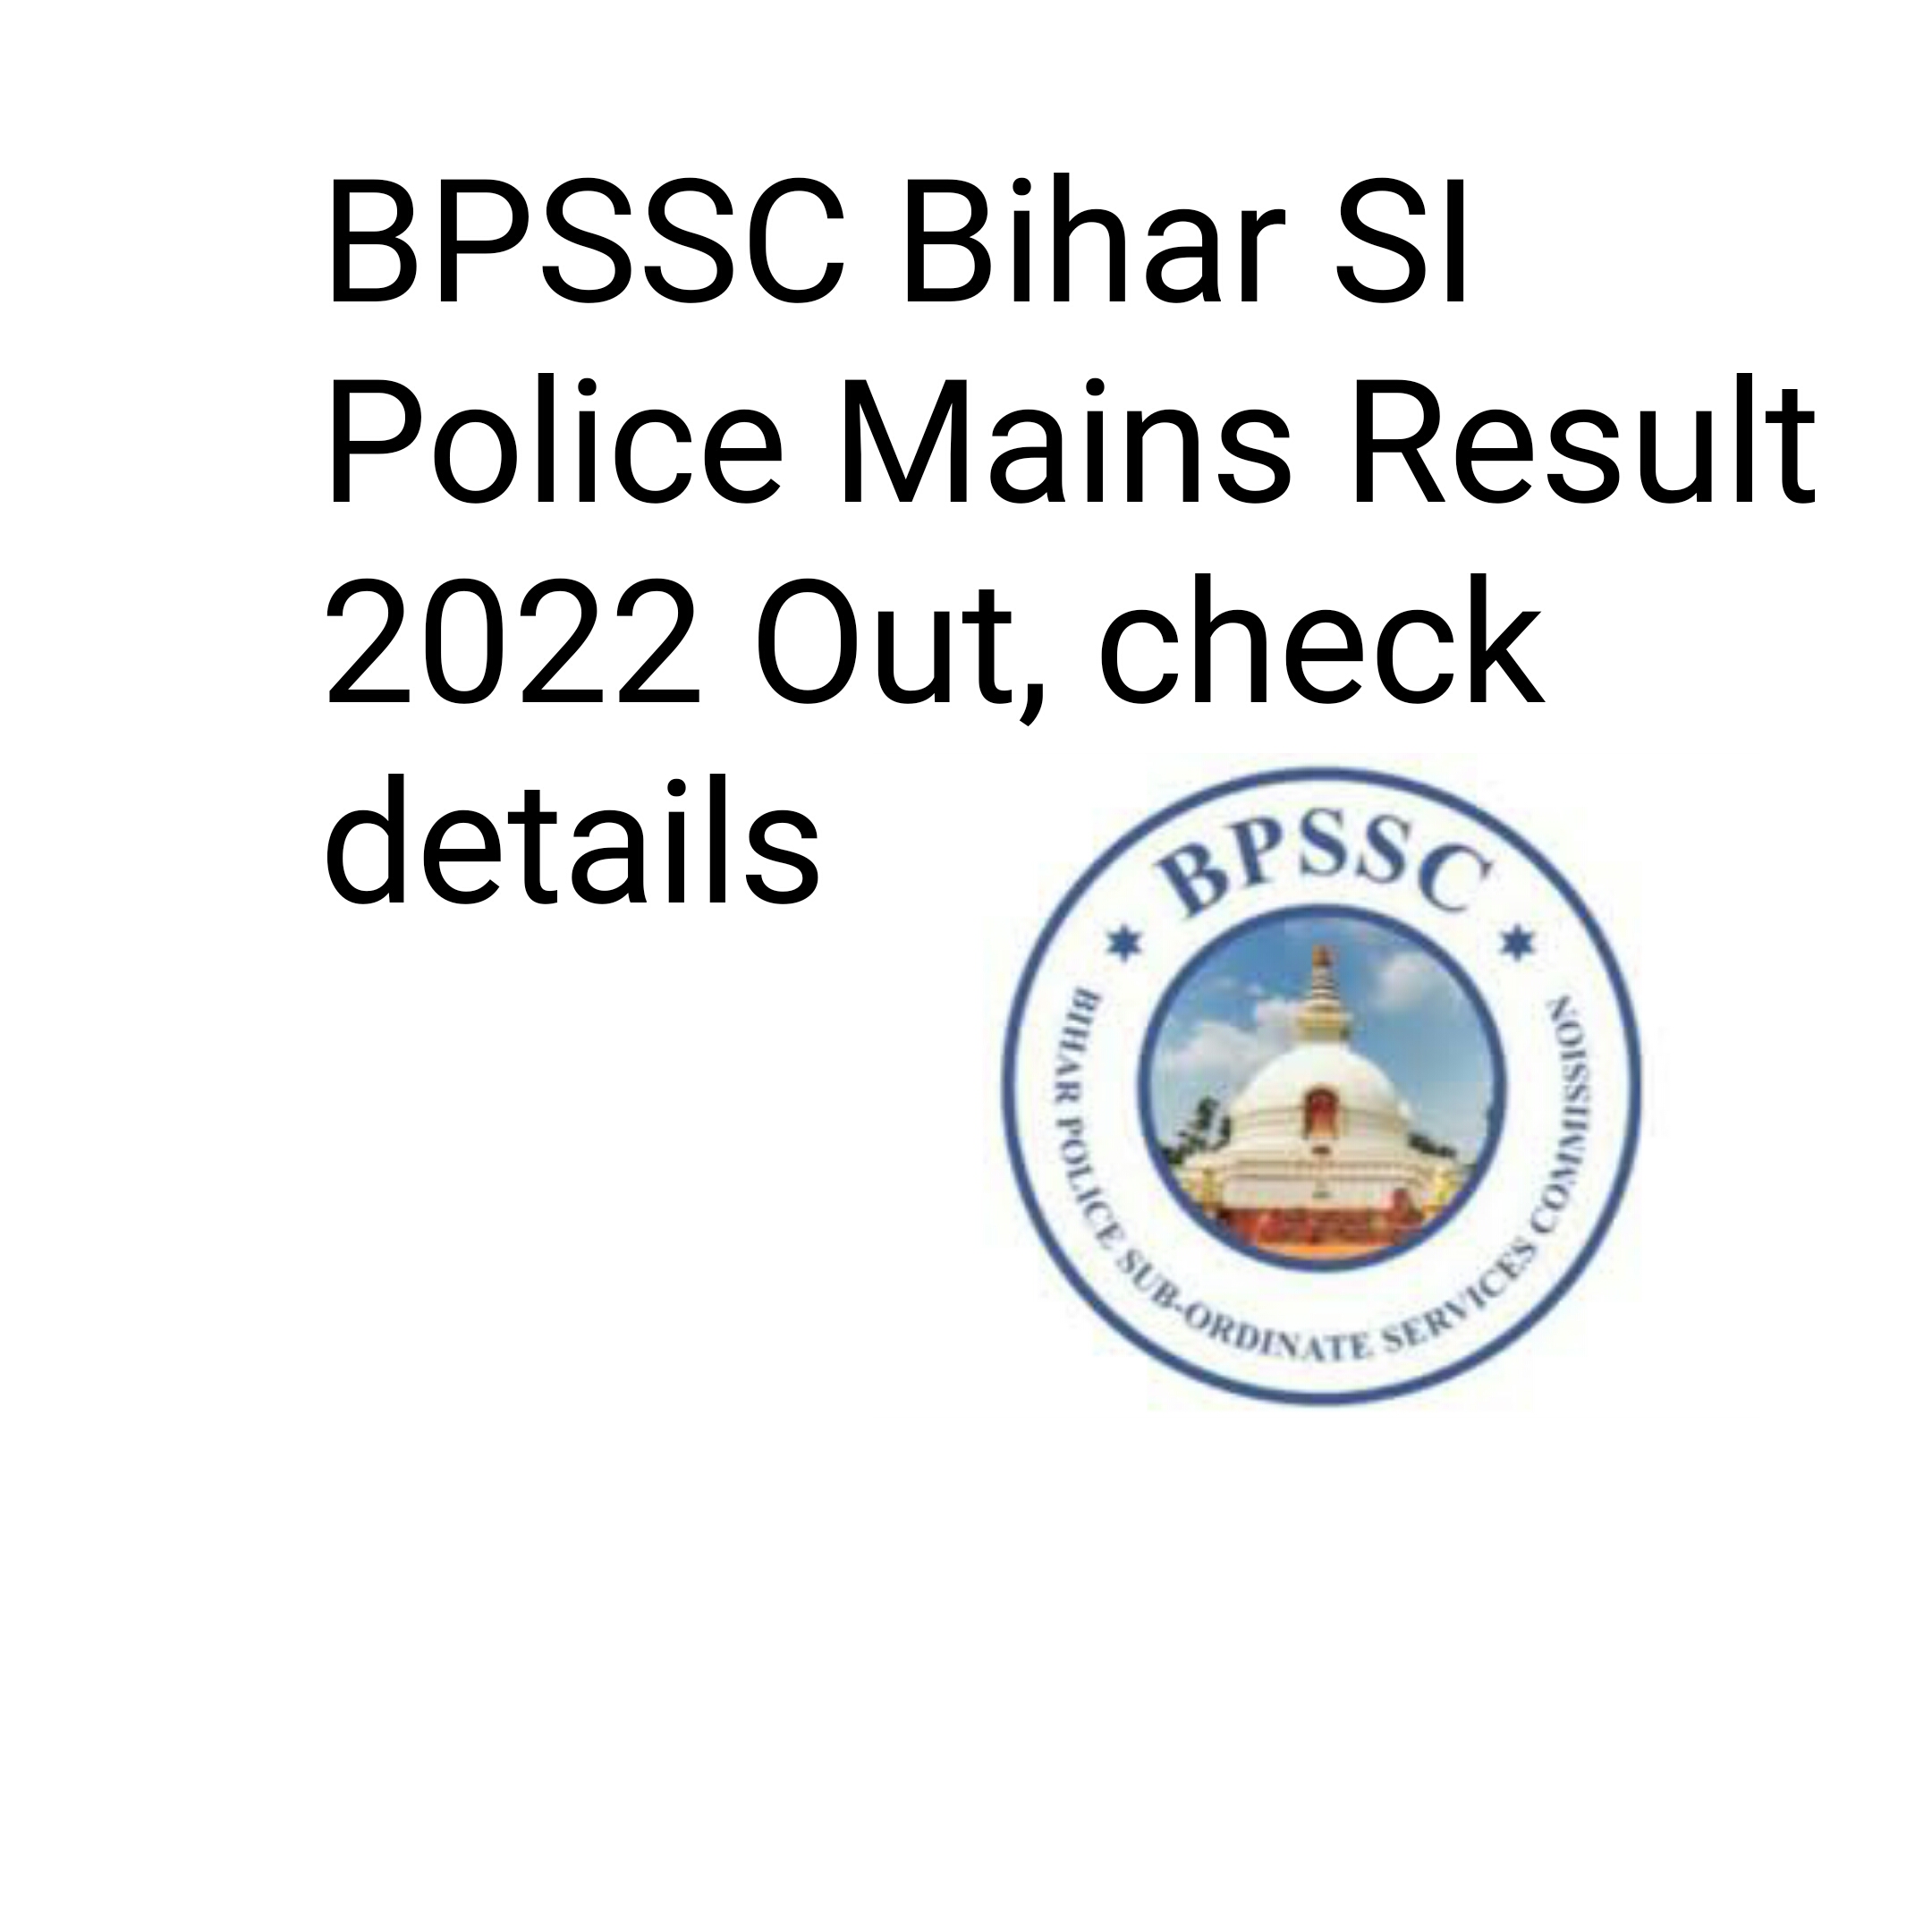 BPSSC Bihar SI Police Mains Result 2022 Out, check details